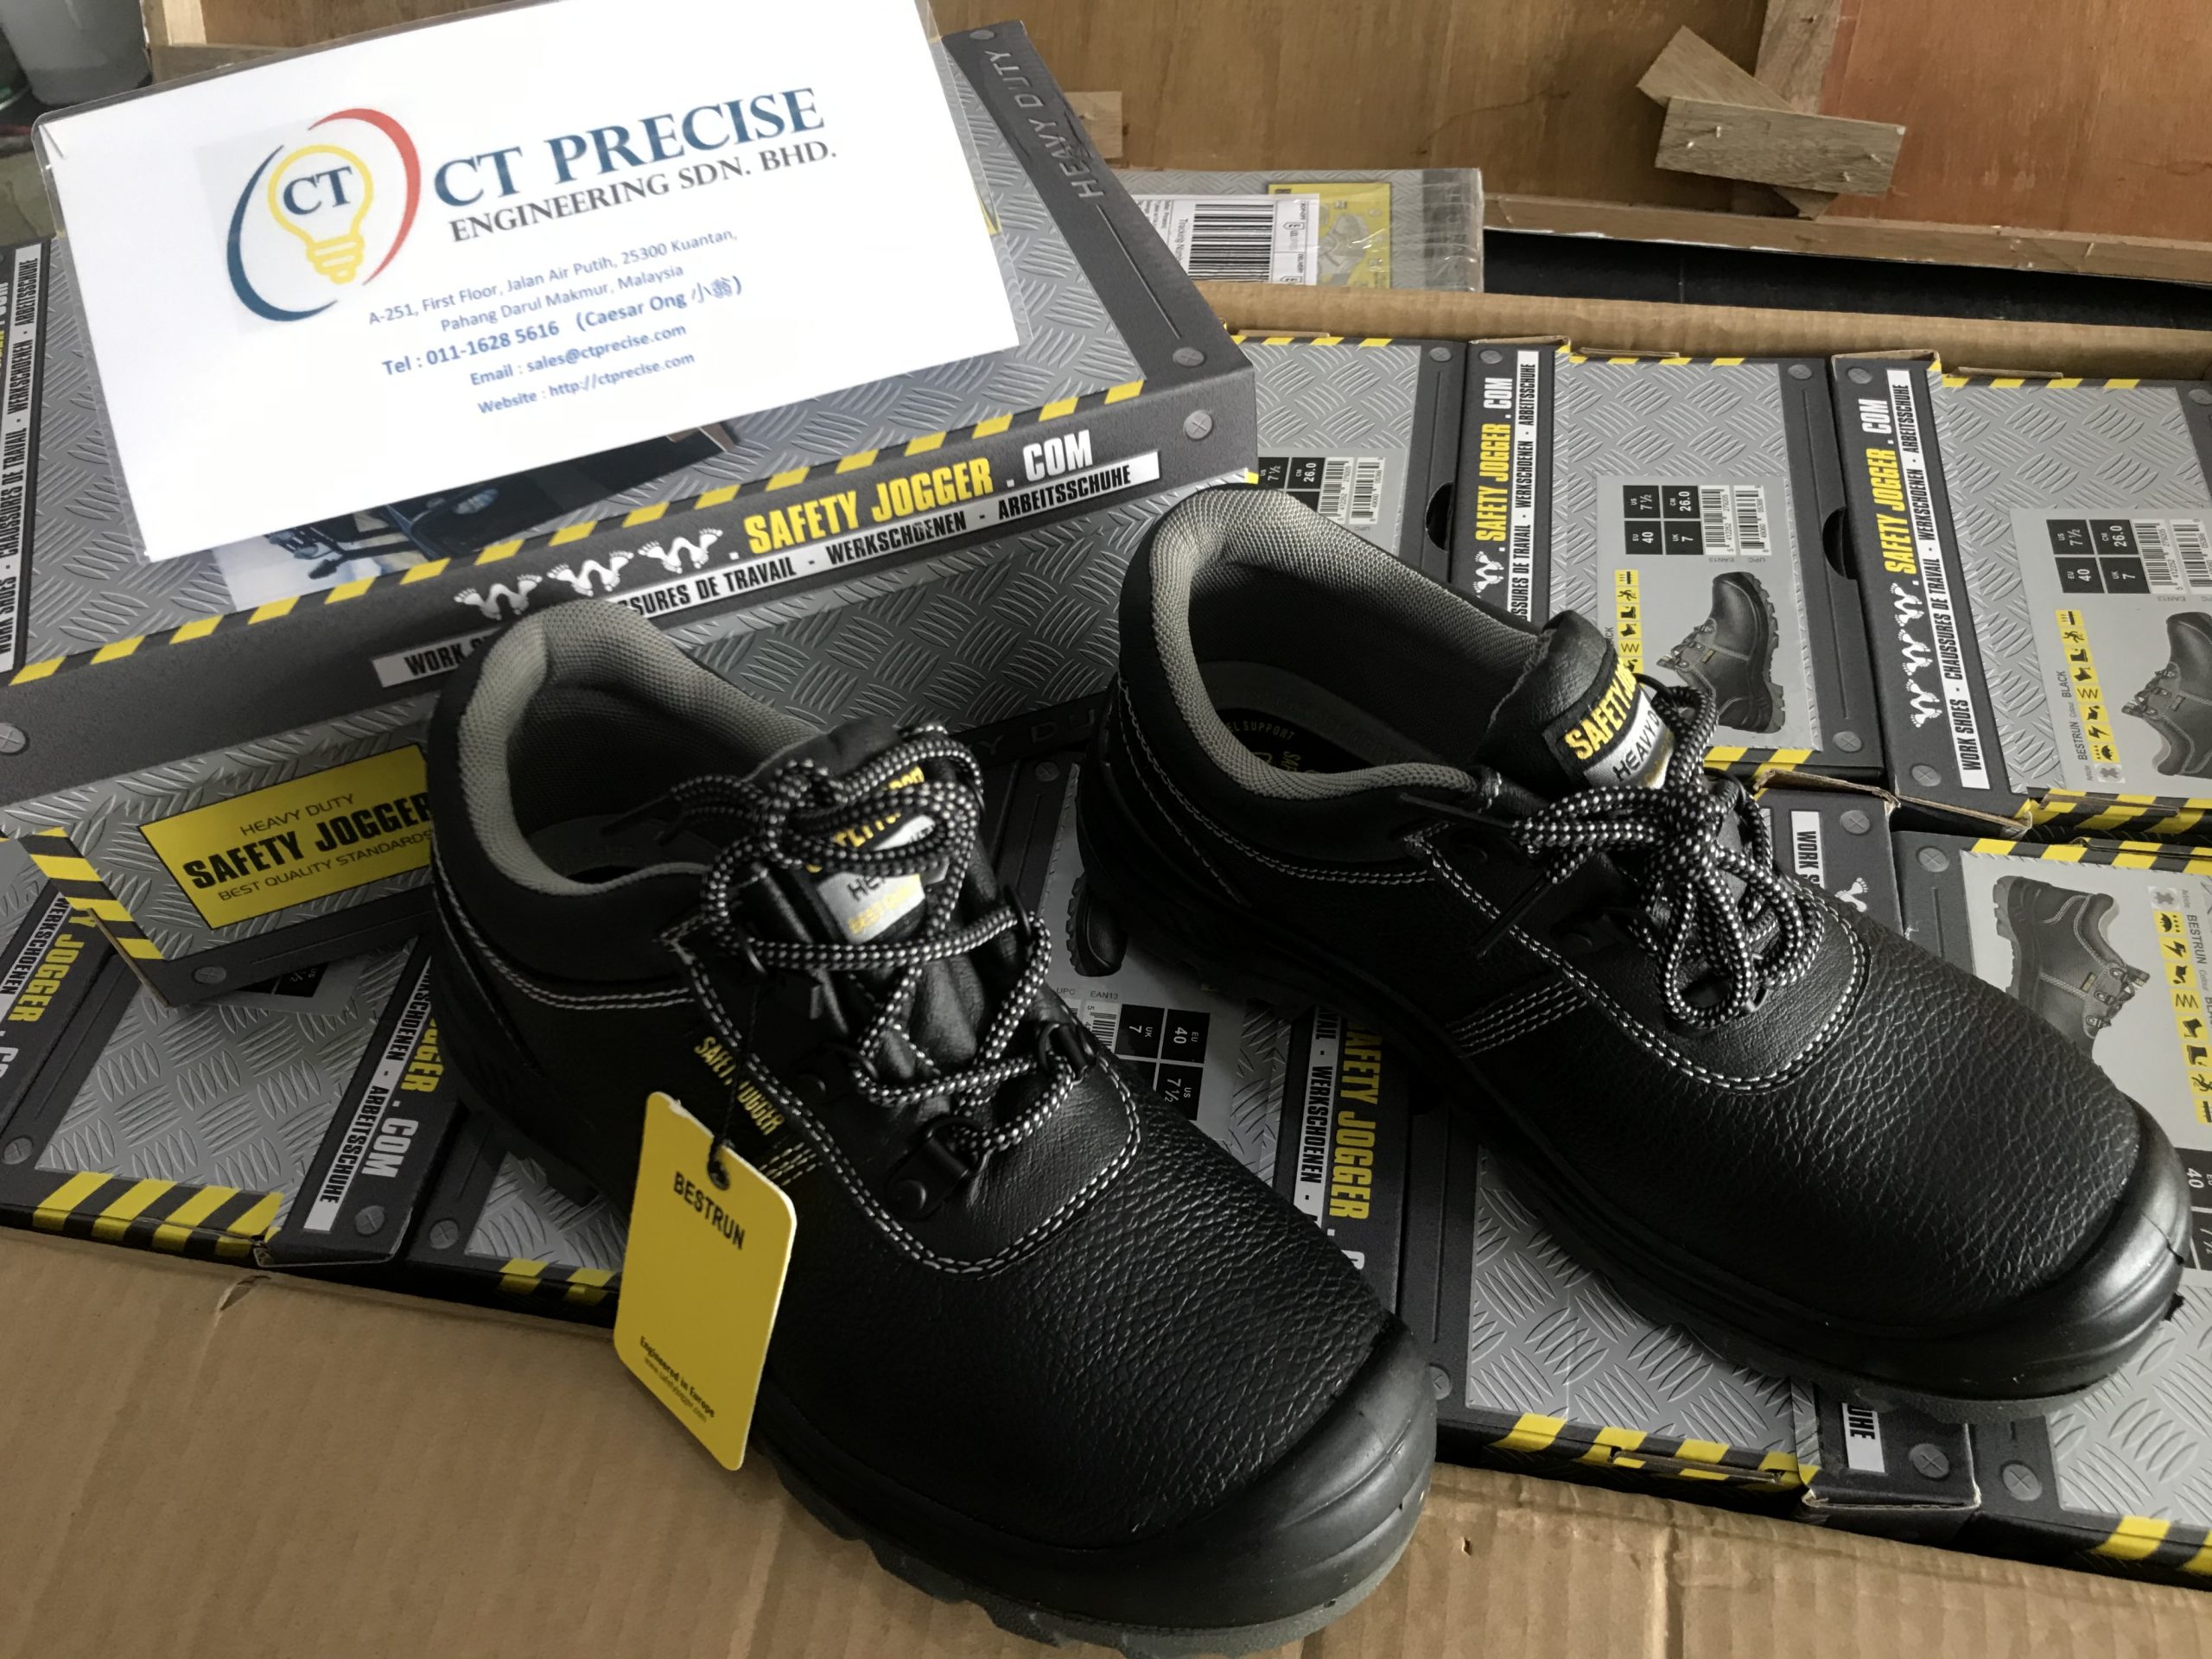 SAFETY JOGGER Safety Shoes - CT PRECISE